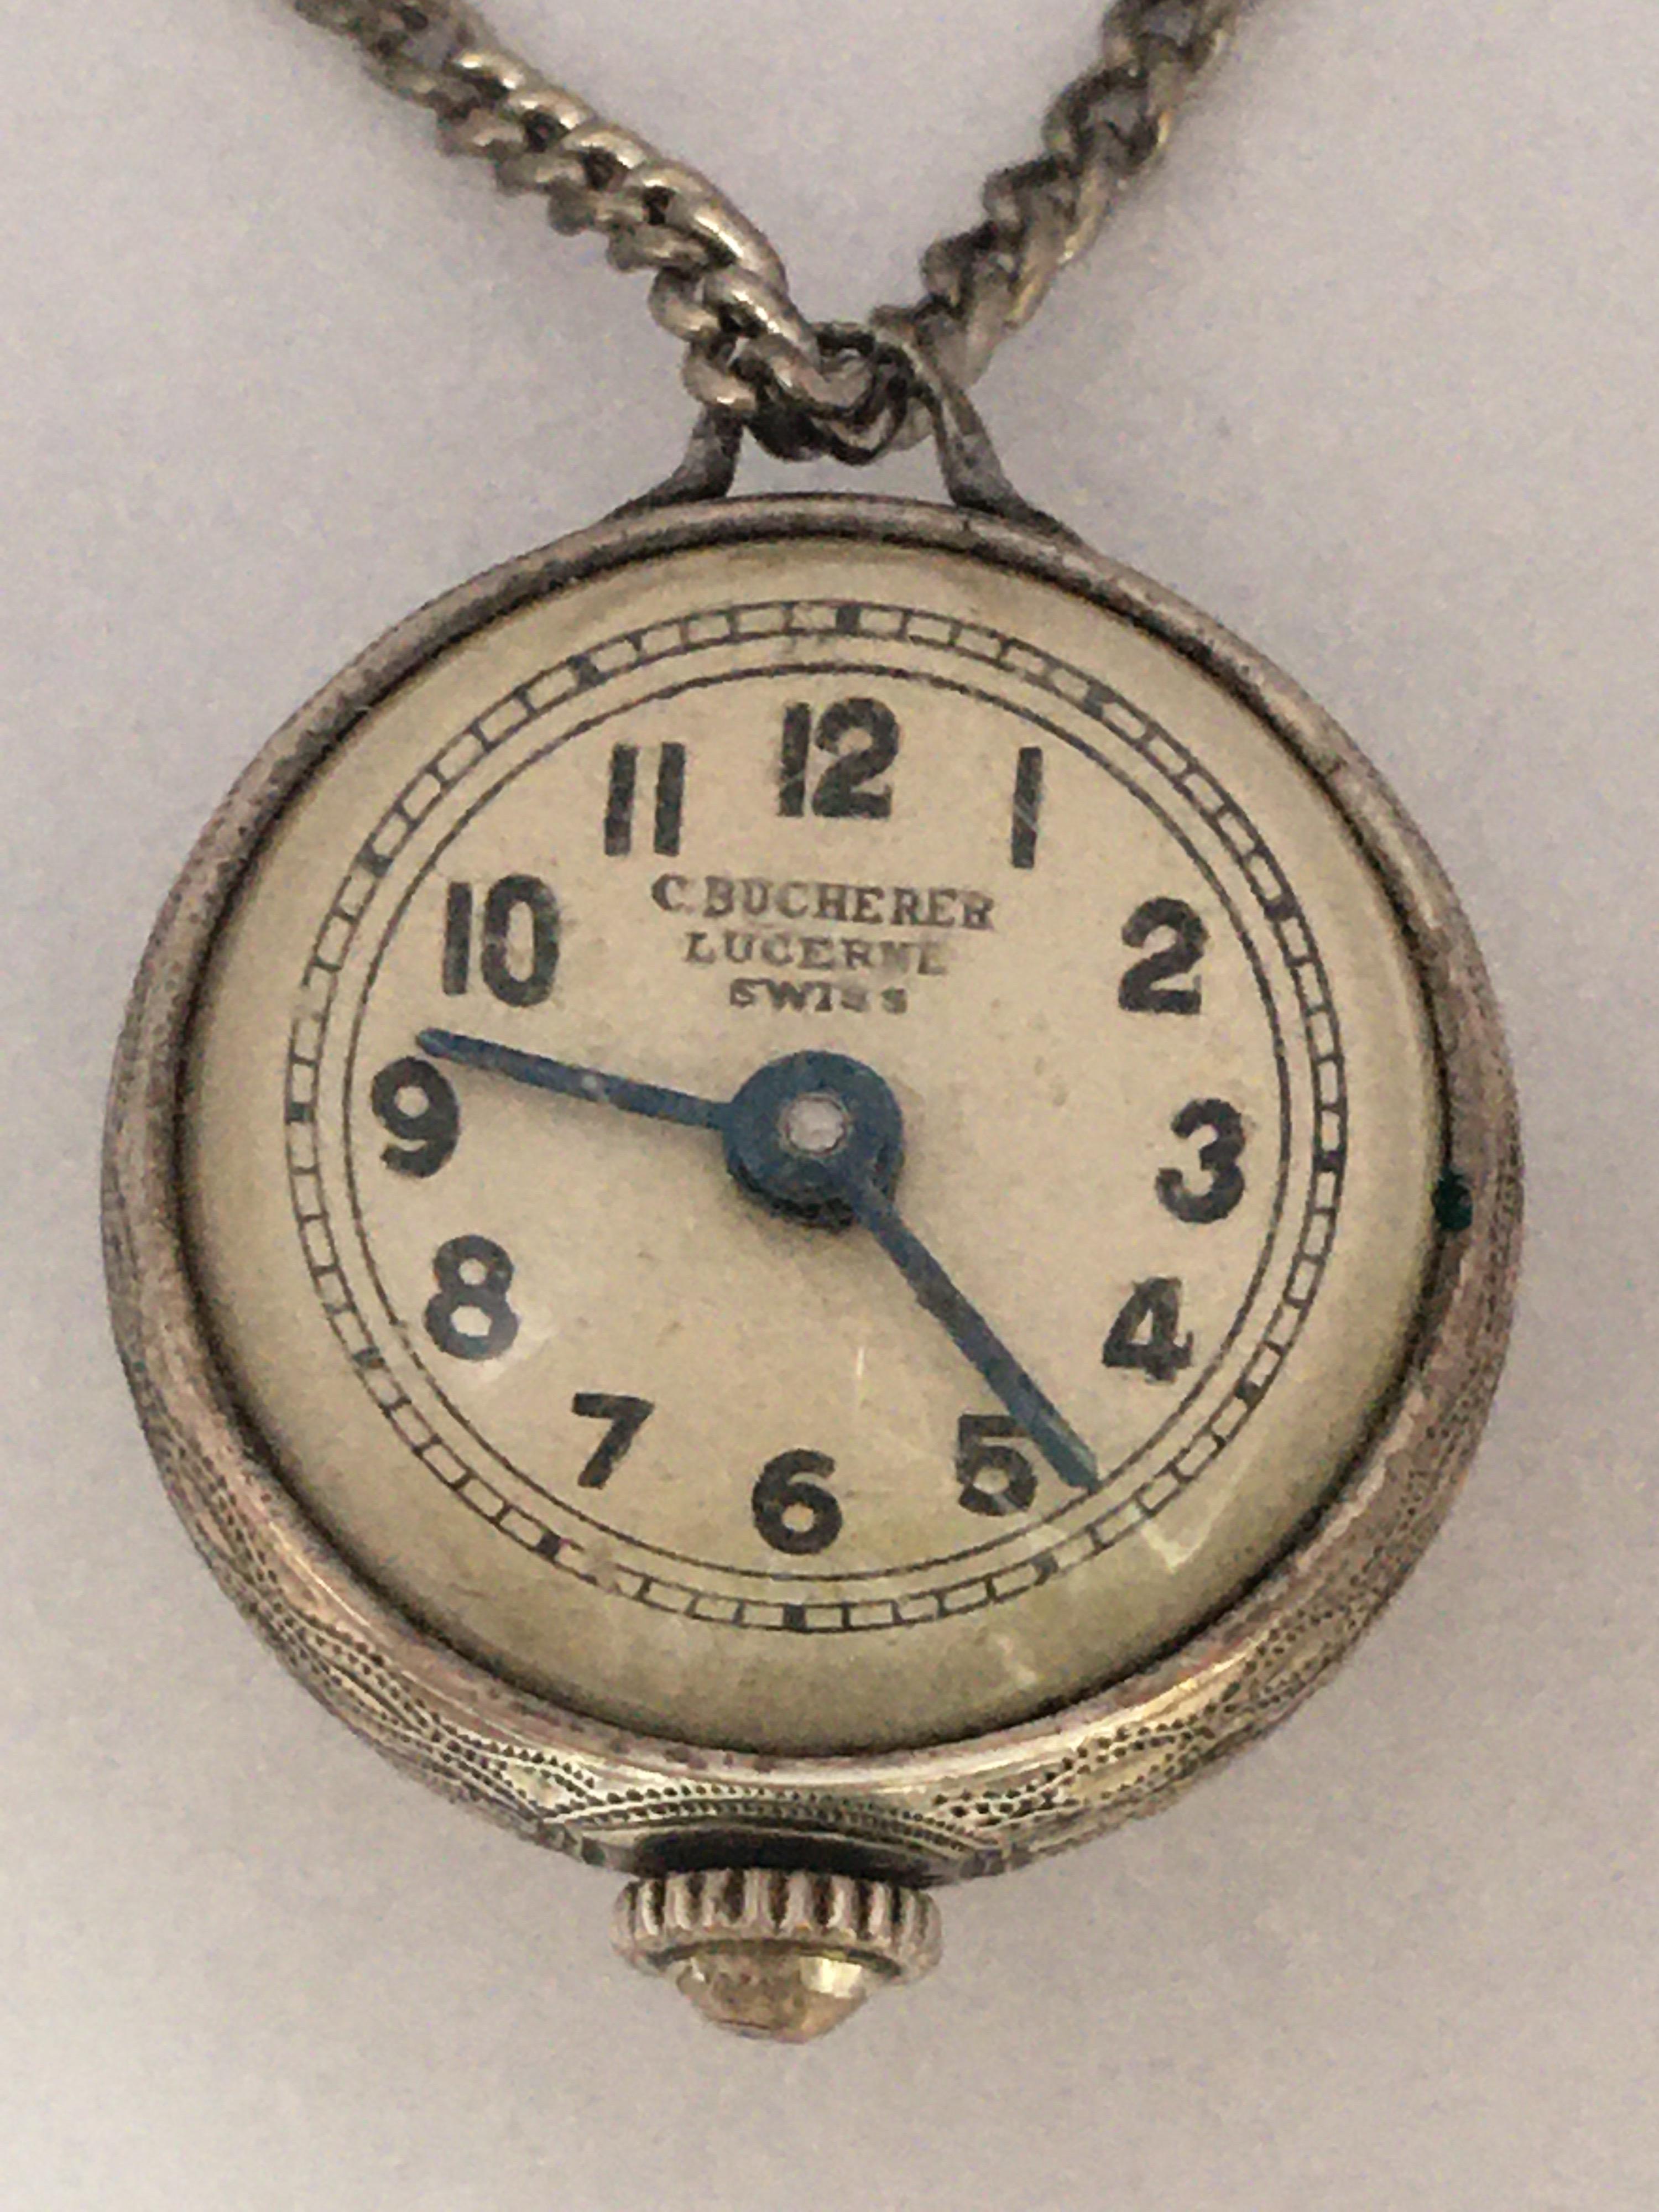 how to open a lucerne pendant watch